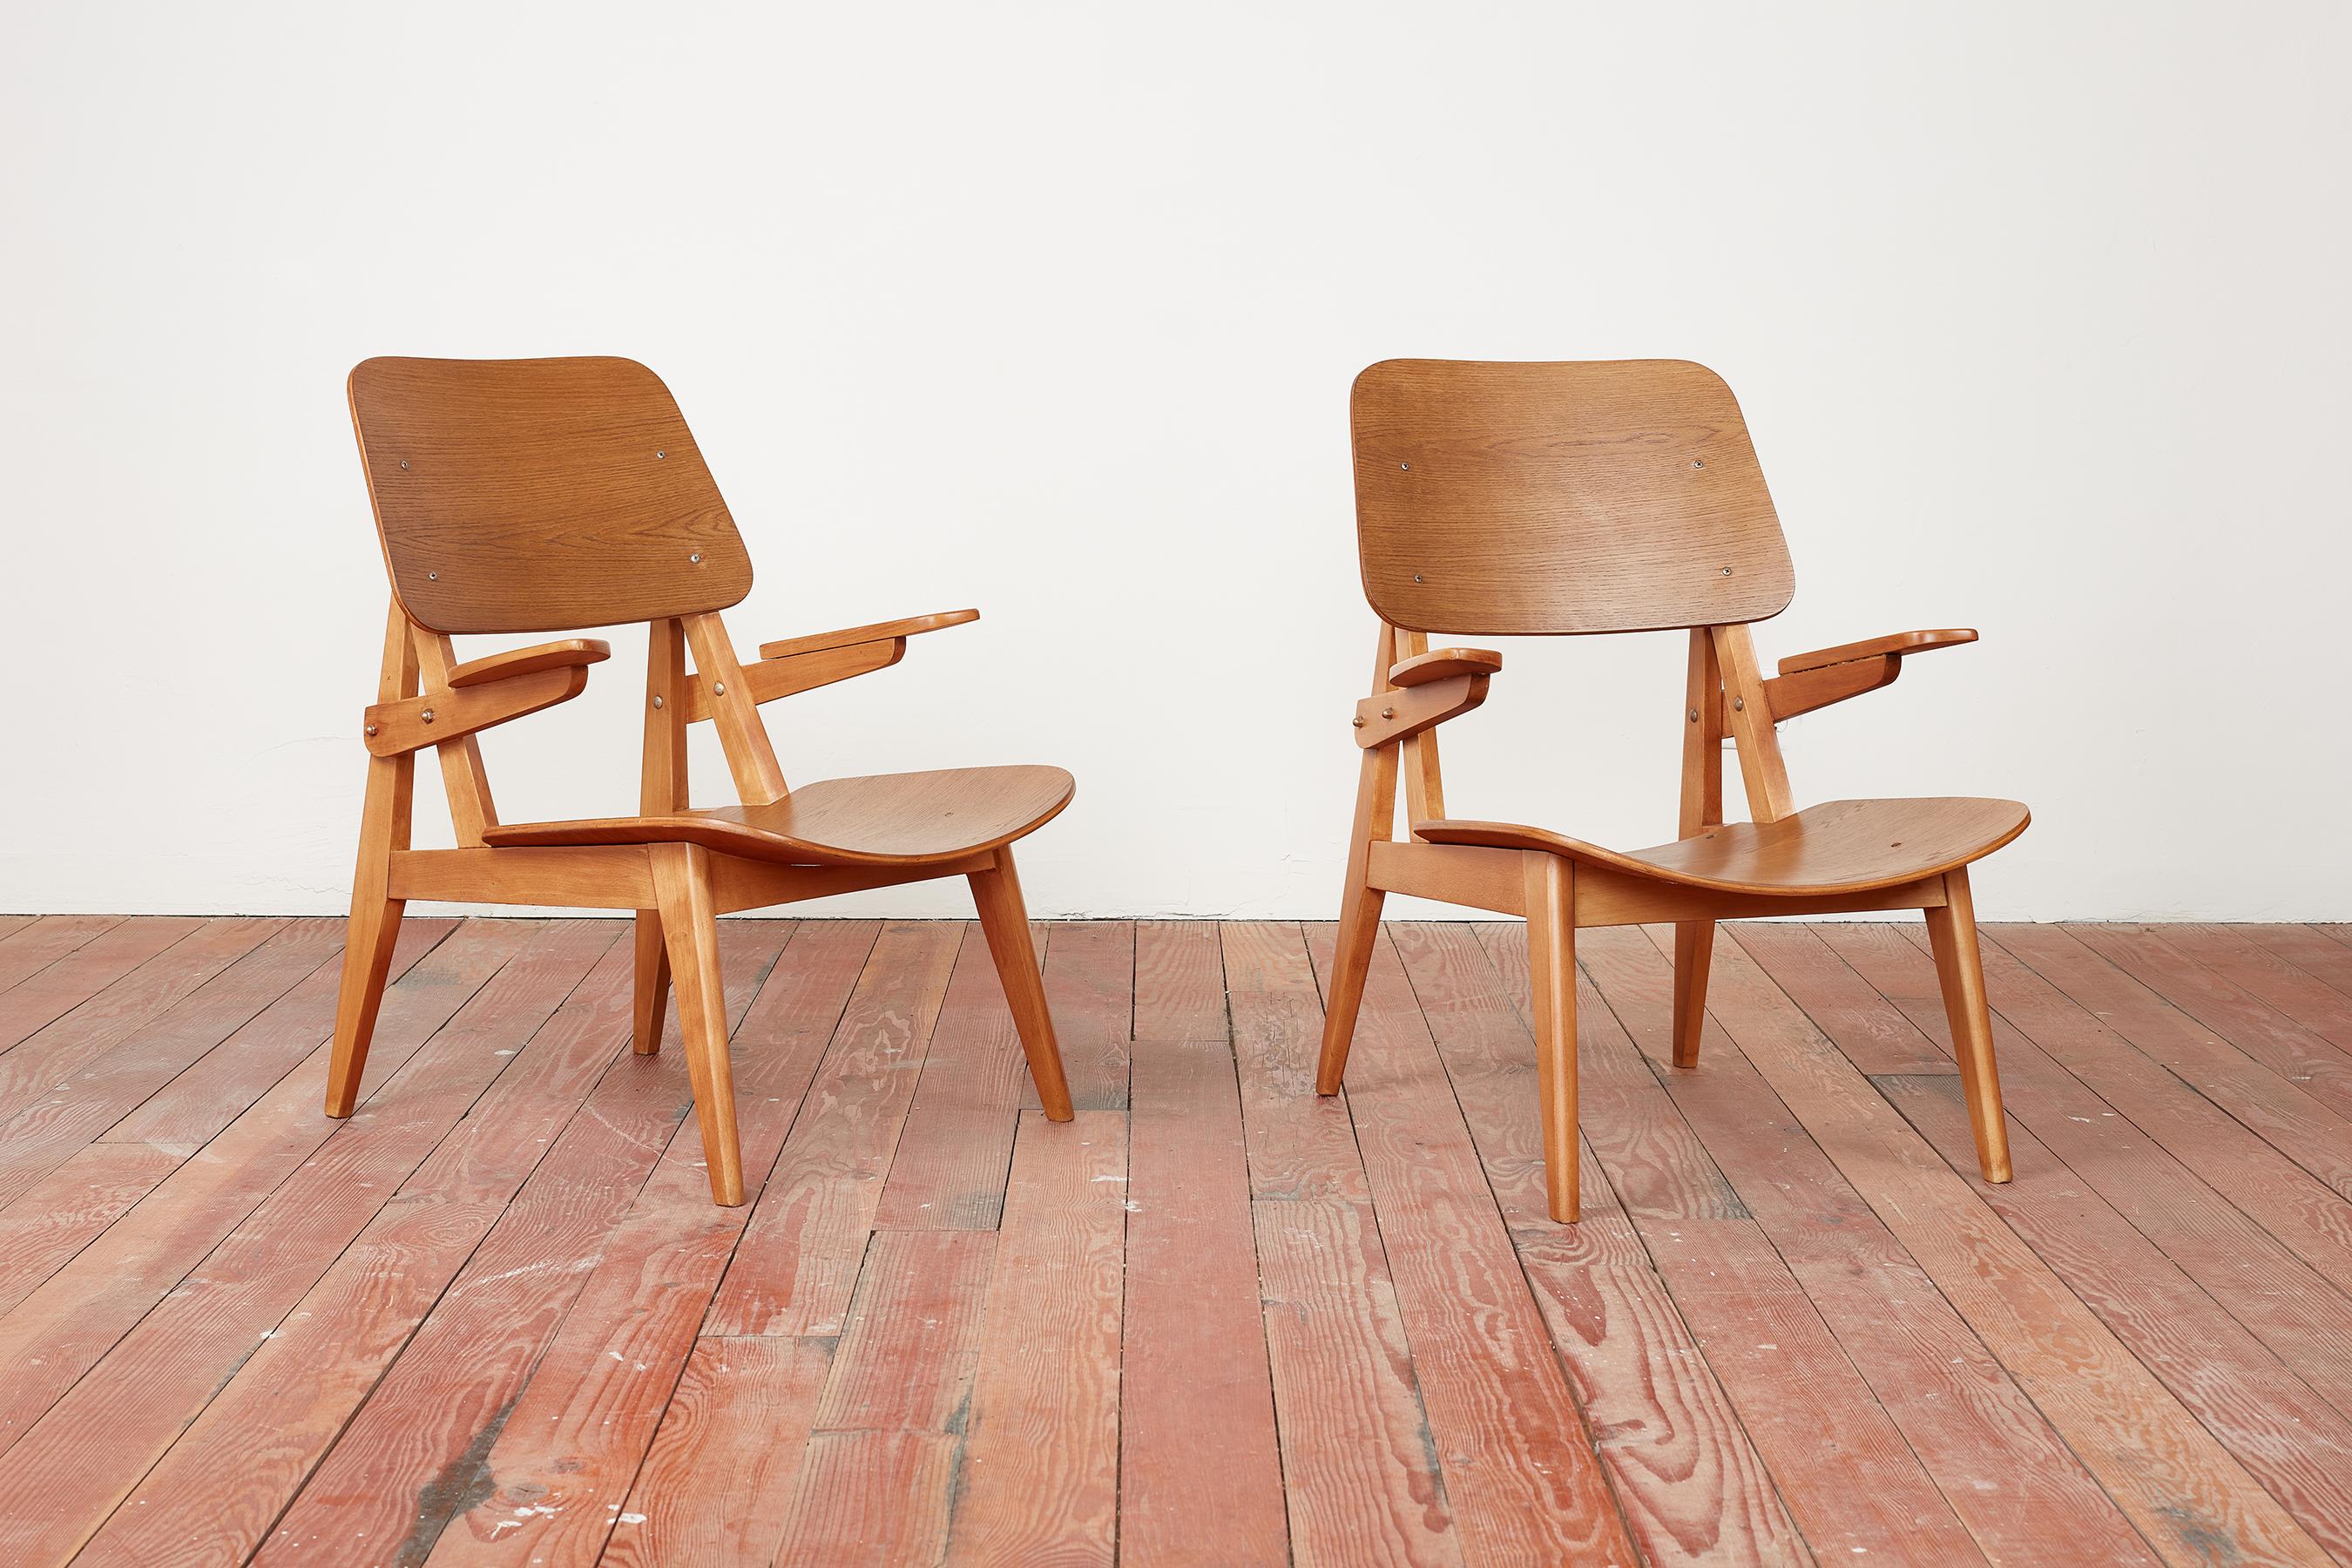 Pair of chairs by Henri Lancel for Cité University d'Antony 
France, circa 1956
Constructed of beech legs and ash plywood seat and back
Newly restored / refinished 
Wonderful angular shape and craftsmanship 
From the collection of Academy of